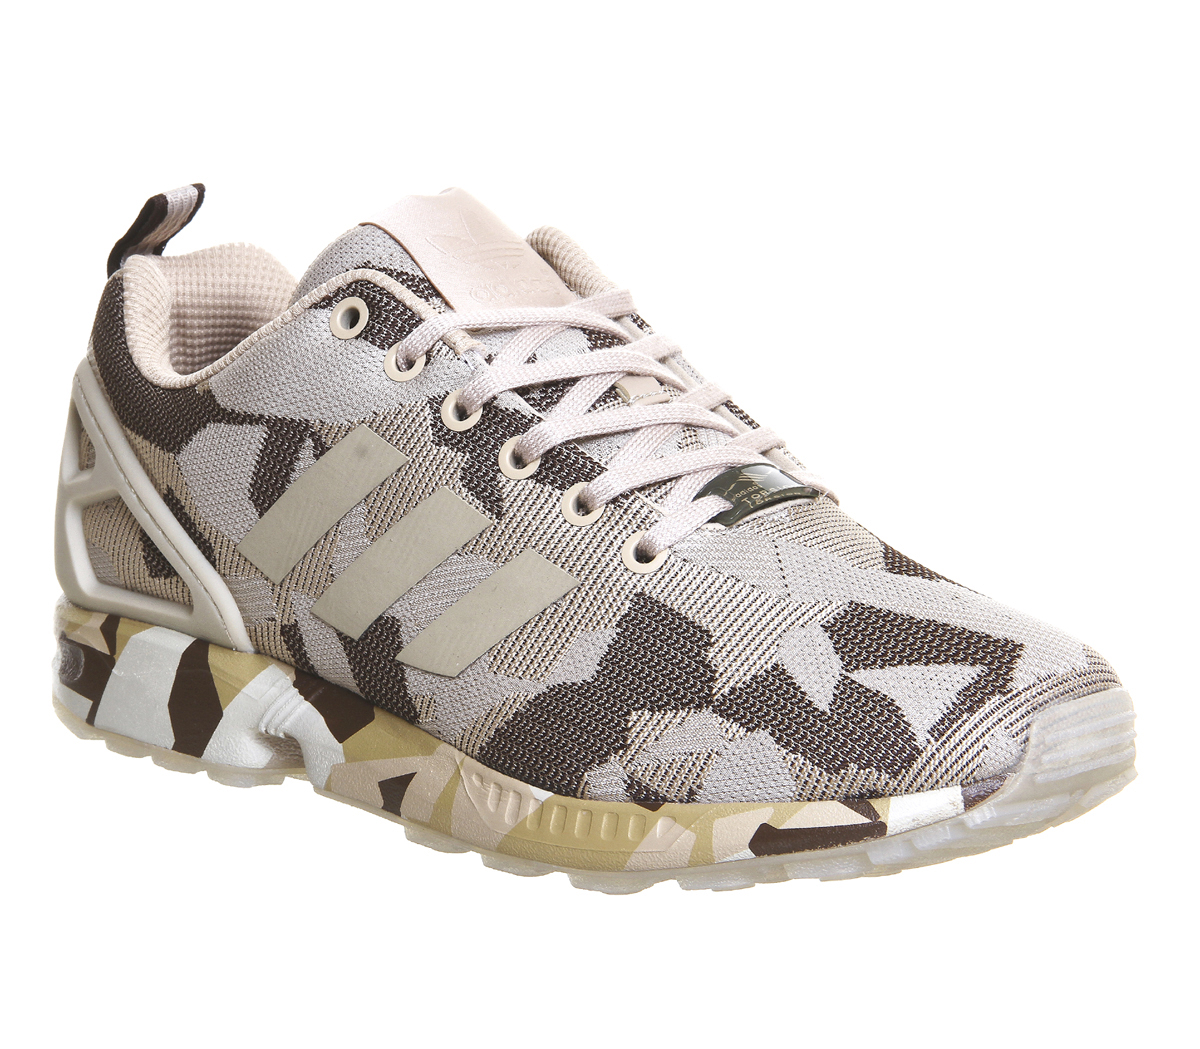 adidas zx flux camouflage The Adidas Sports Shoes Outlet | Up to 70% Off  Shoes\u200e recruitment.iustlive.com !